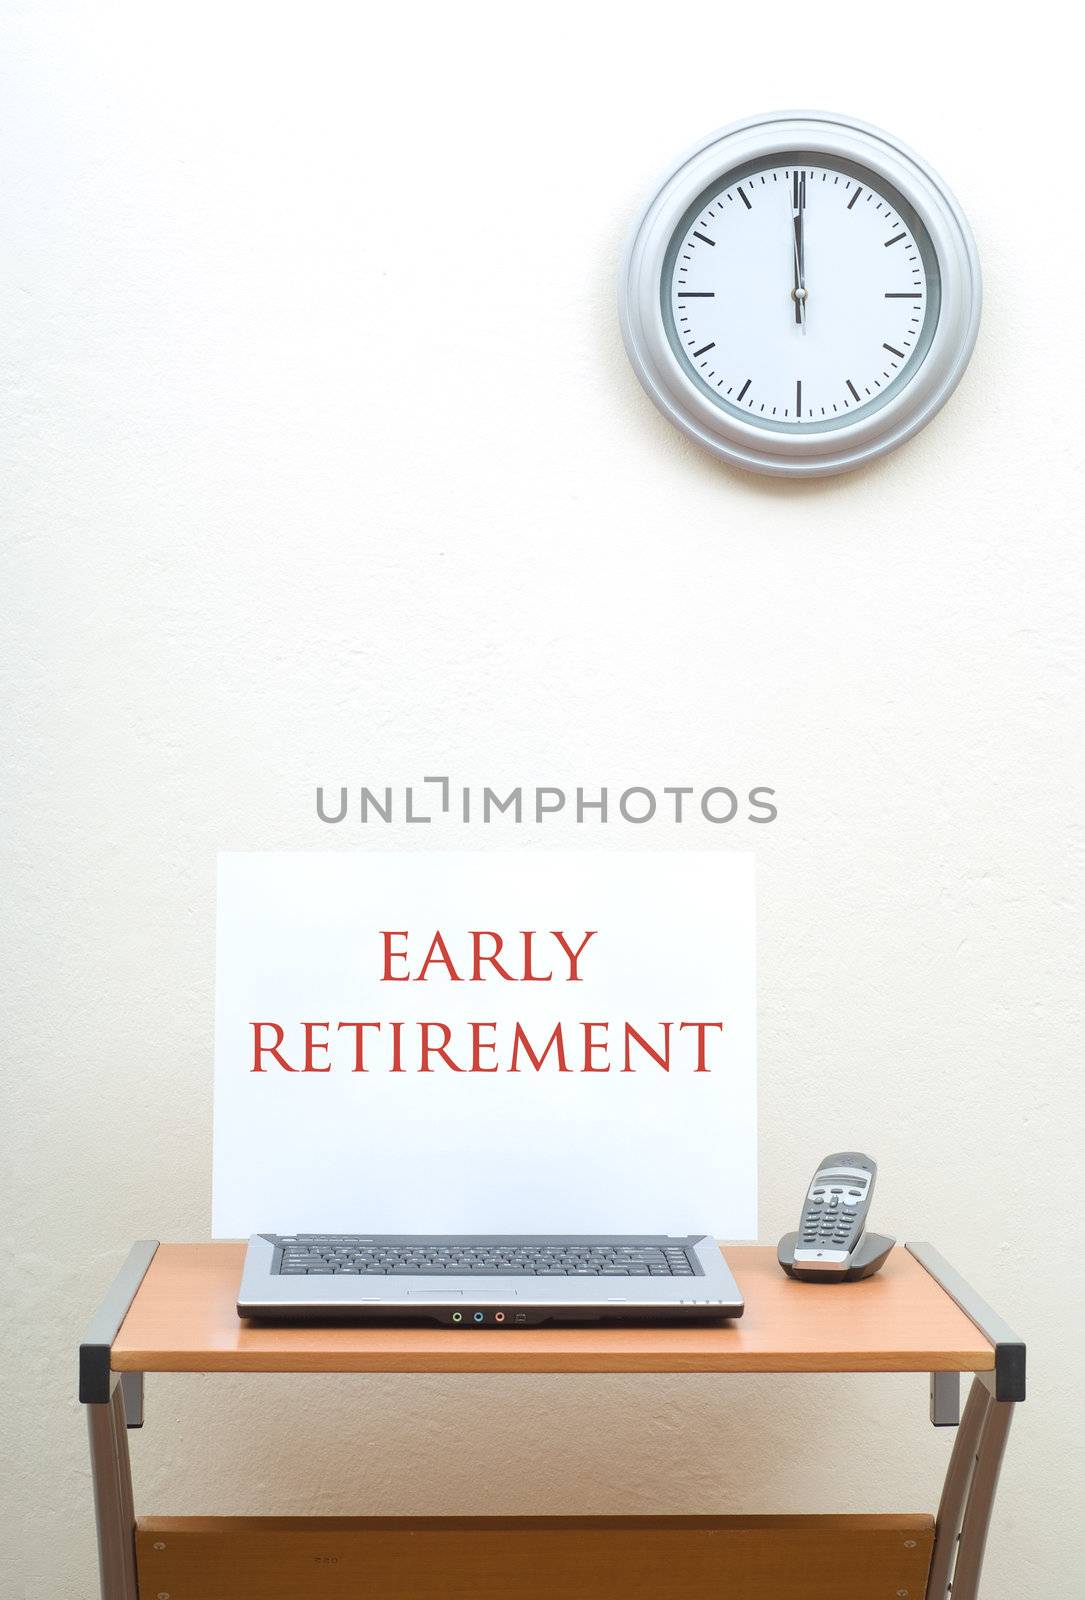 Office desk with early retirement sign on open laptop with portable phone, clock on wall above desk